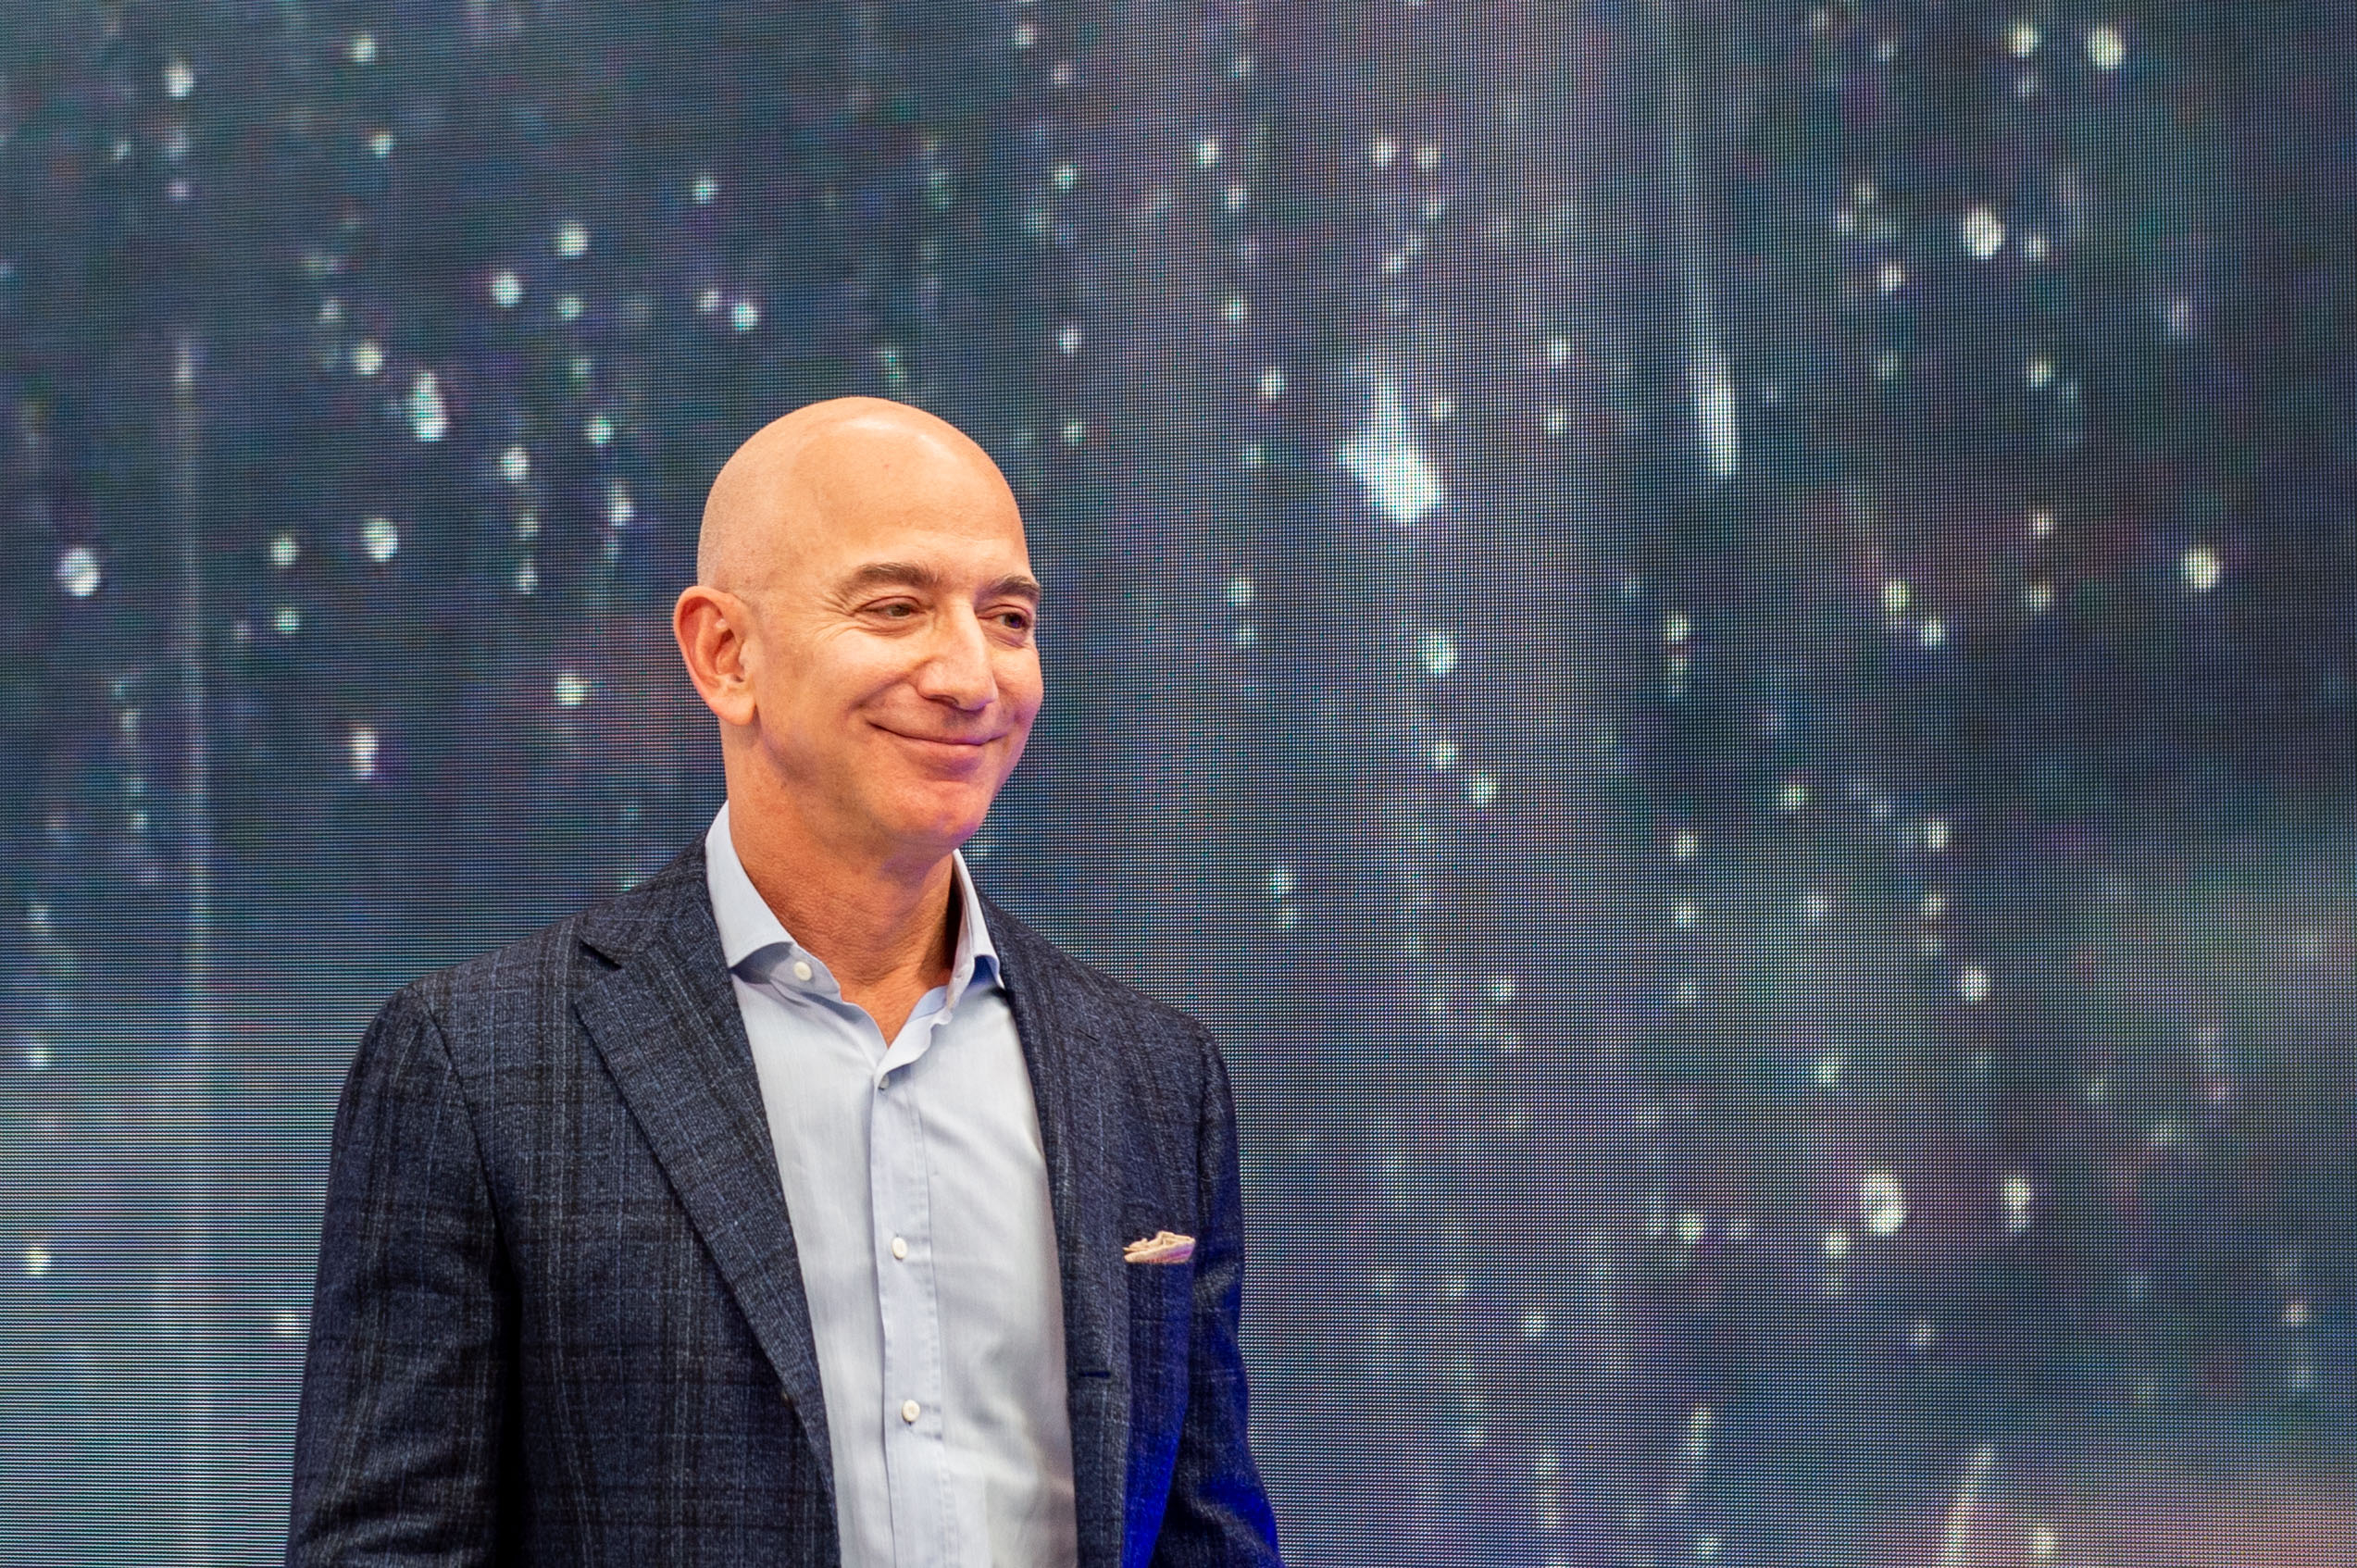 PHOTO: Jeff Bezos, head of Amazon, is seen at a company event, Sept. 25, 2019.